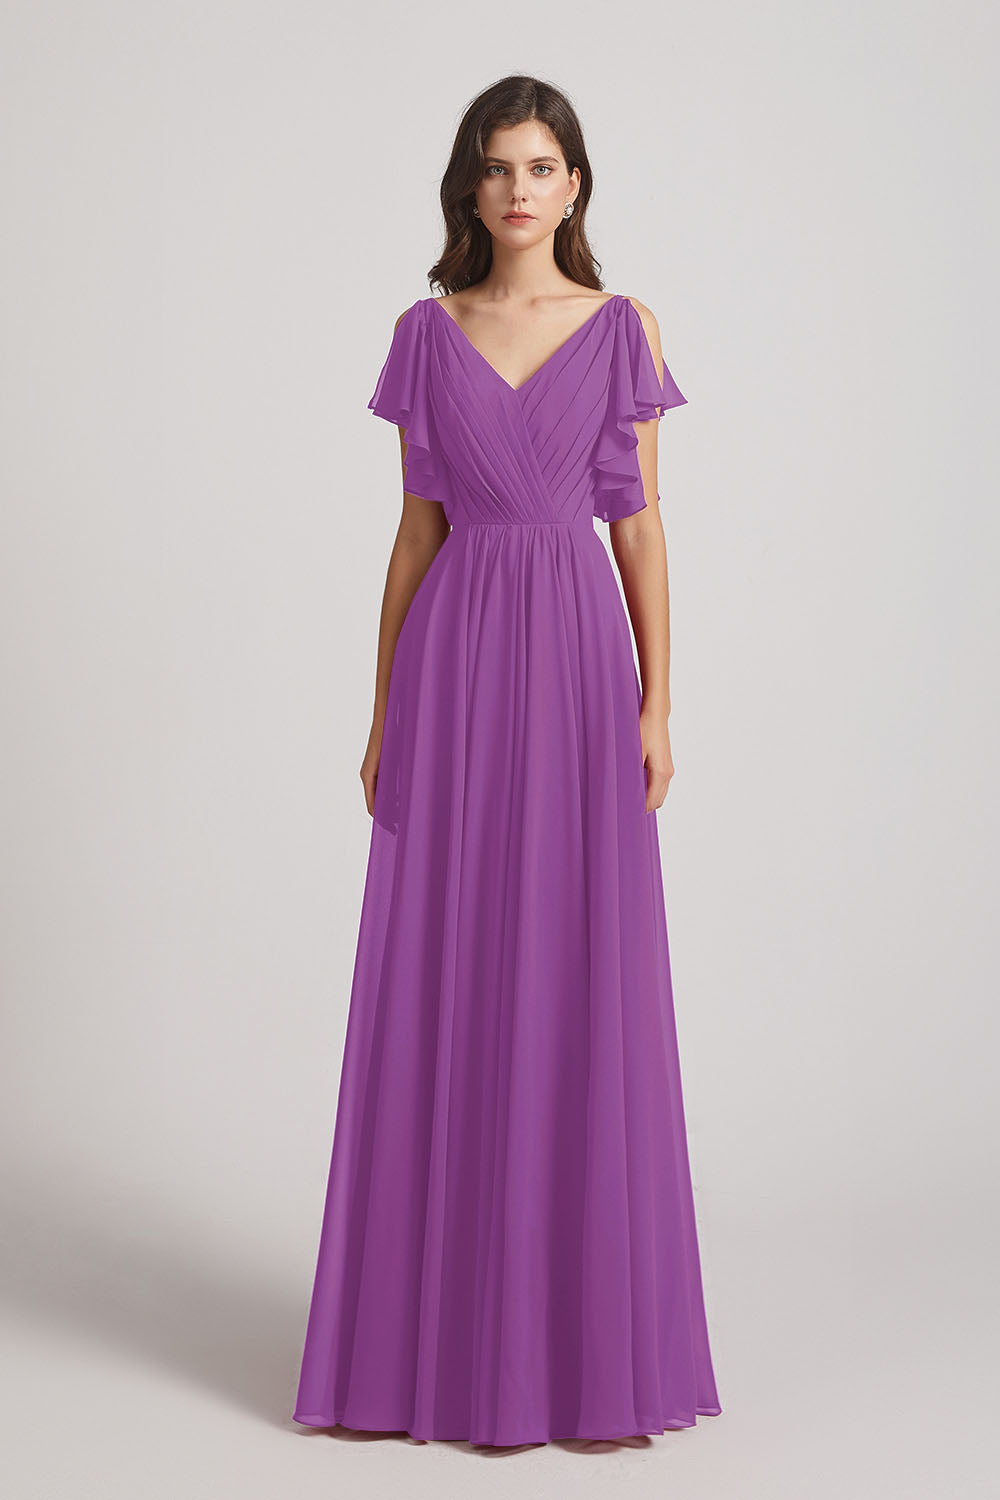 Alfa Bridal Dahlia V-Neck Pleated Chiffon Bridesmaid Dresses with Open Flutter Sleeves (AF0098)